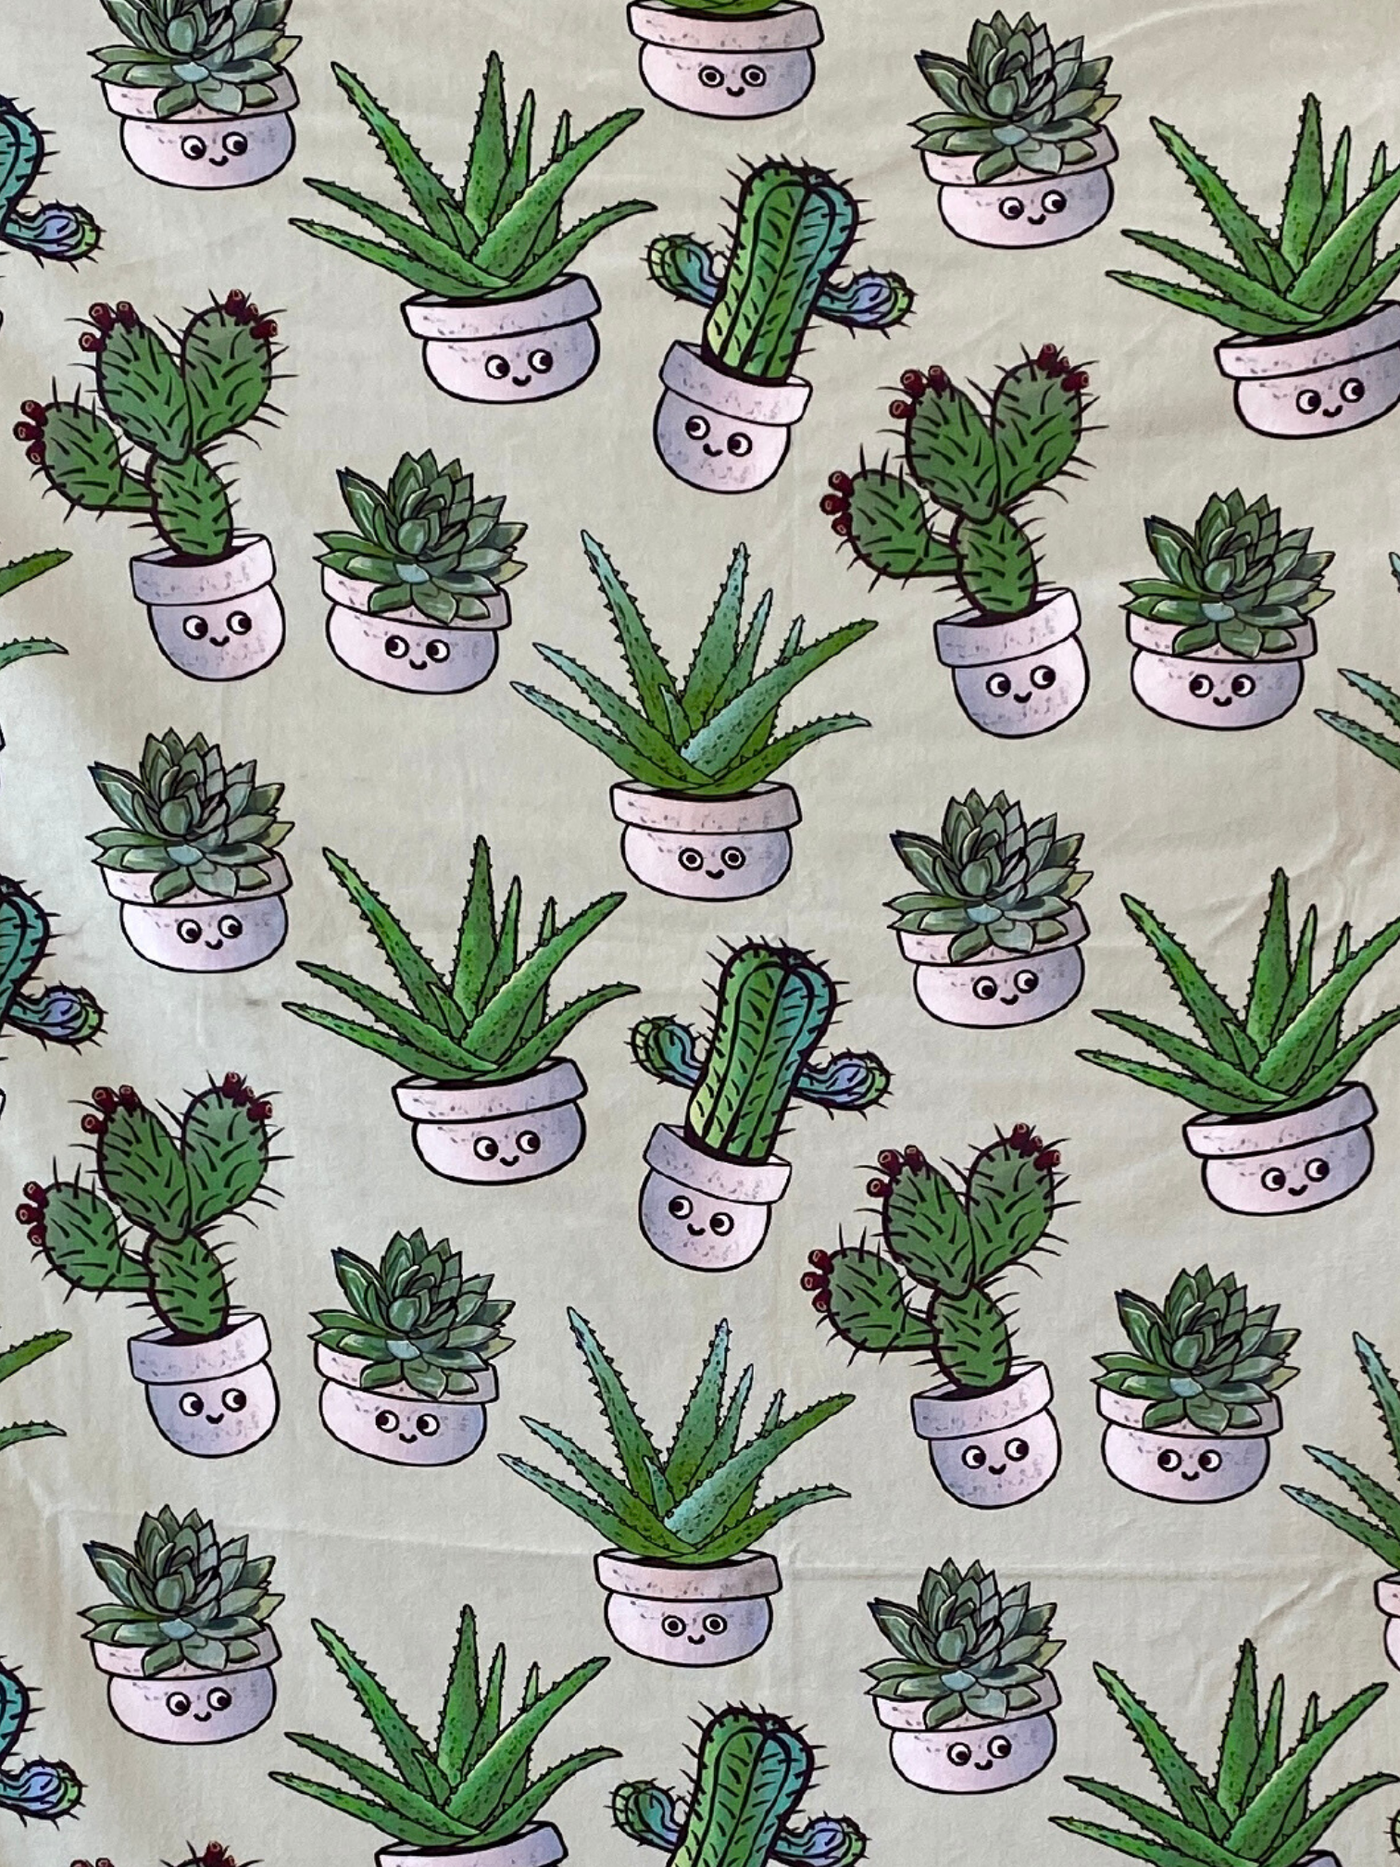 Adult Towel: Soft Cactus and Succulent Plants Sage Green